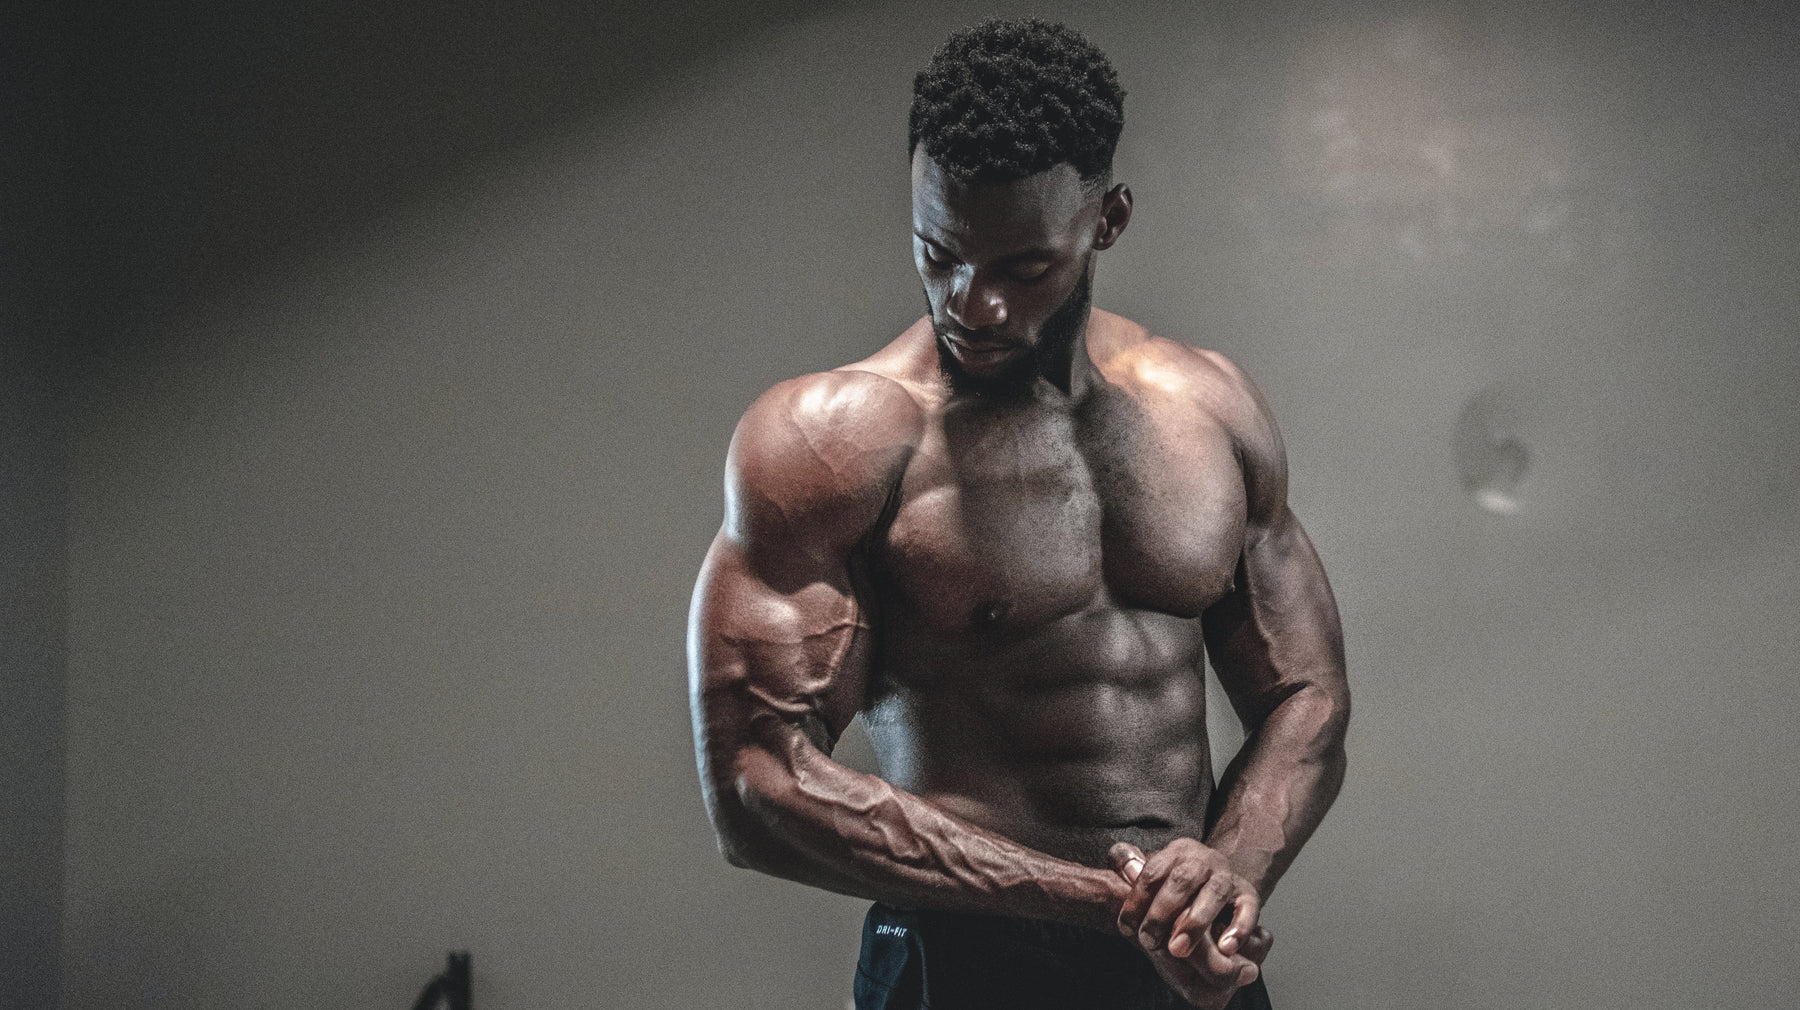 Common Mistakes People Make When Trying to Get Shredded + 6 Starter Goals